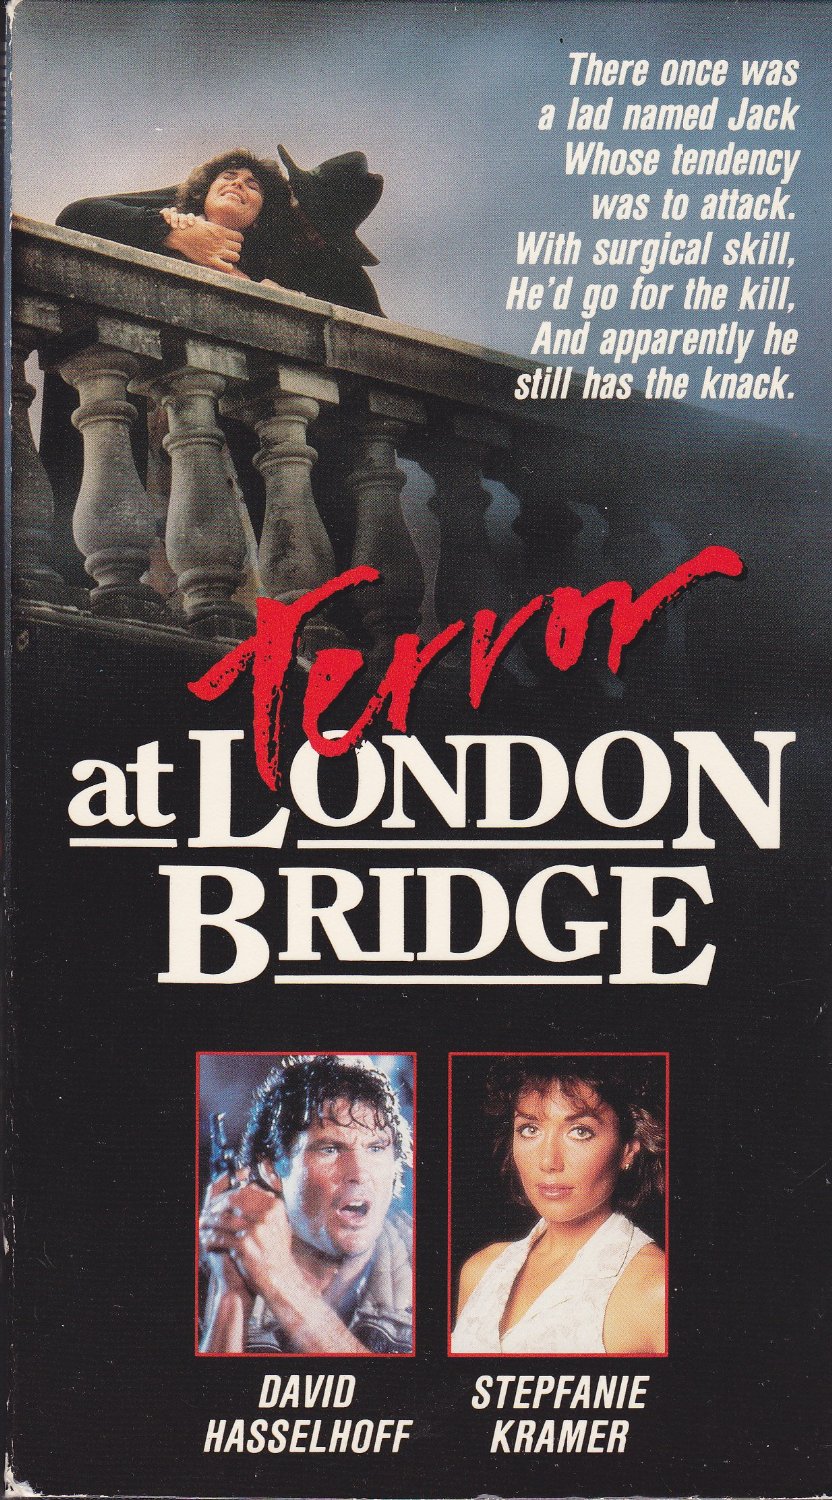 Terror at London Bridge (1985) starring David Hasselhoff, Stepfanie Kramer, Randolph Mantooth - There was once a lad named Jack, Whose tendency was to attack. With surgical skill, He'd go for the kill, And apparently he still has the knack.